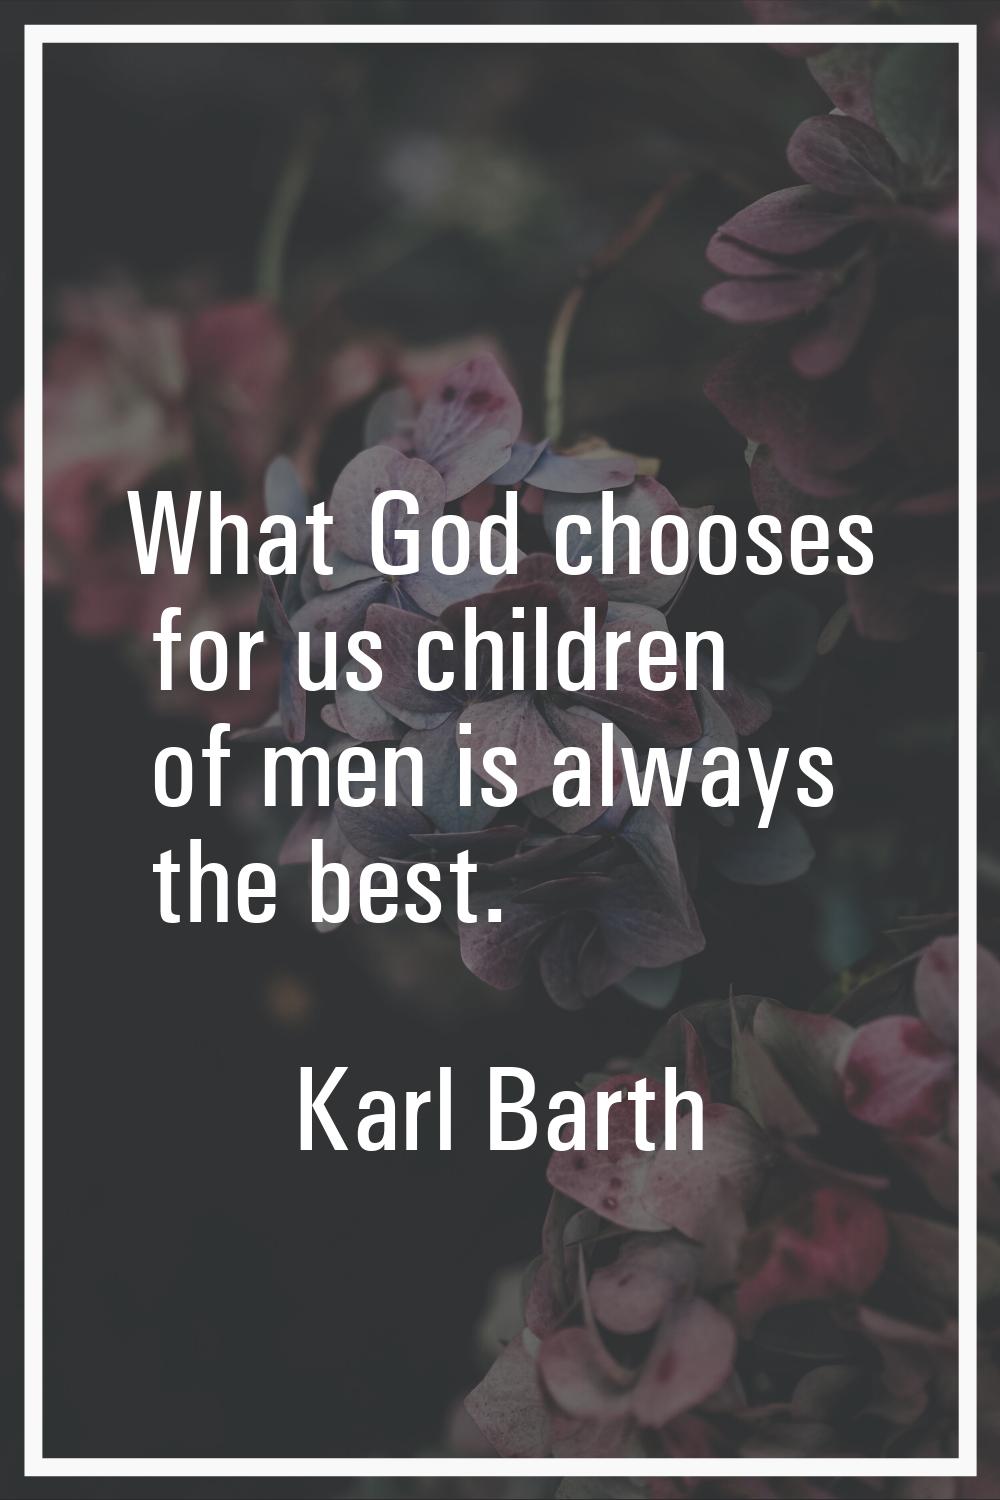 What God chooses for us children of men is always the best.